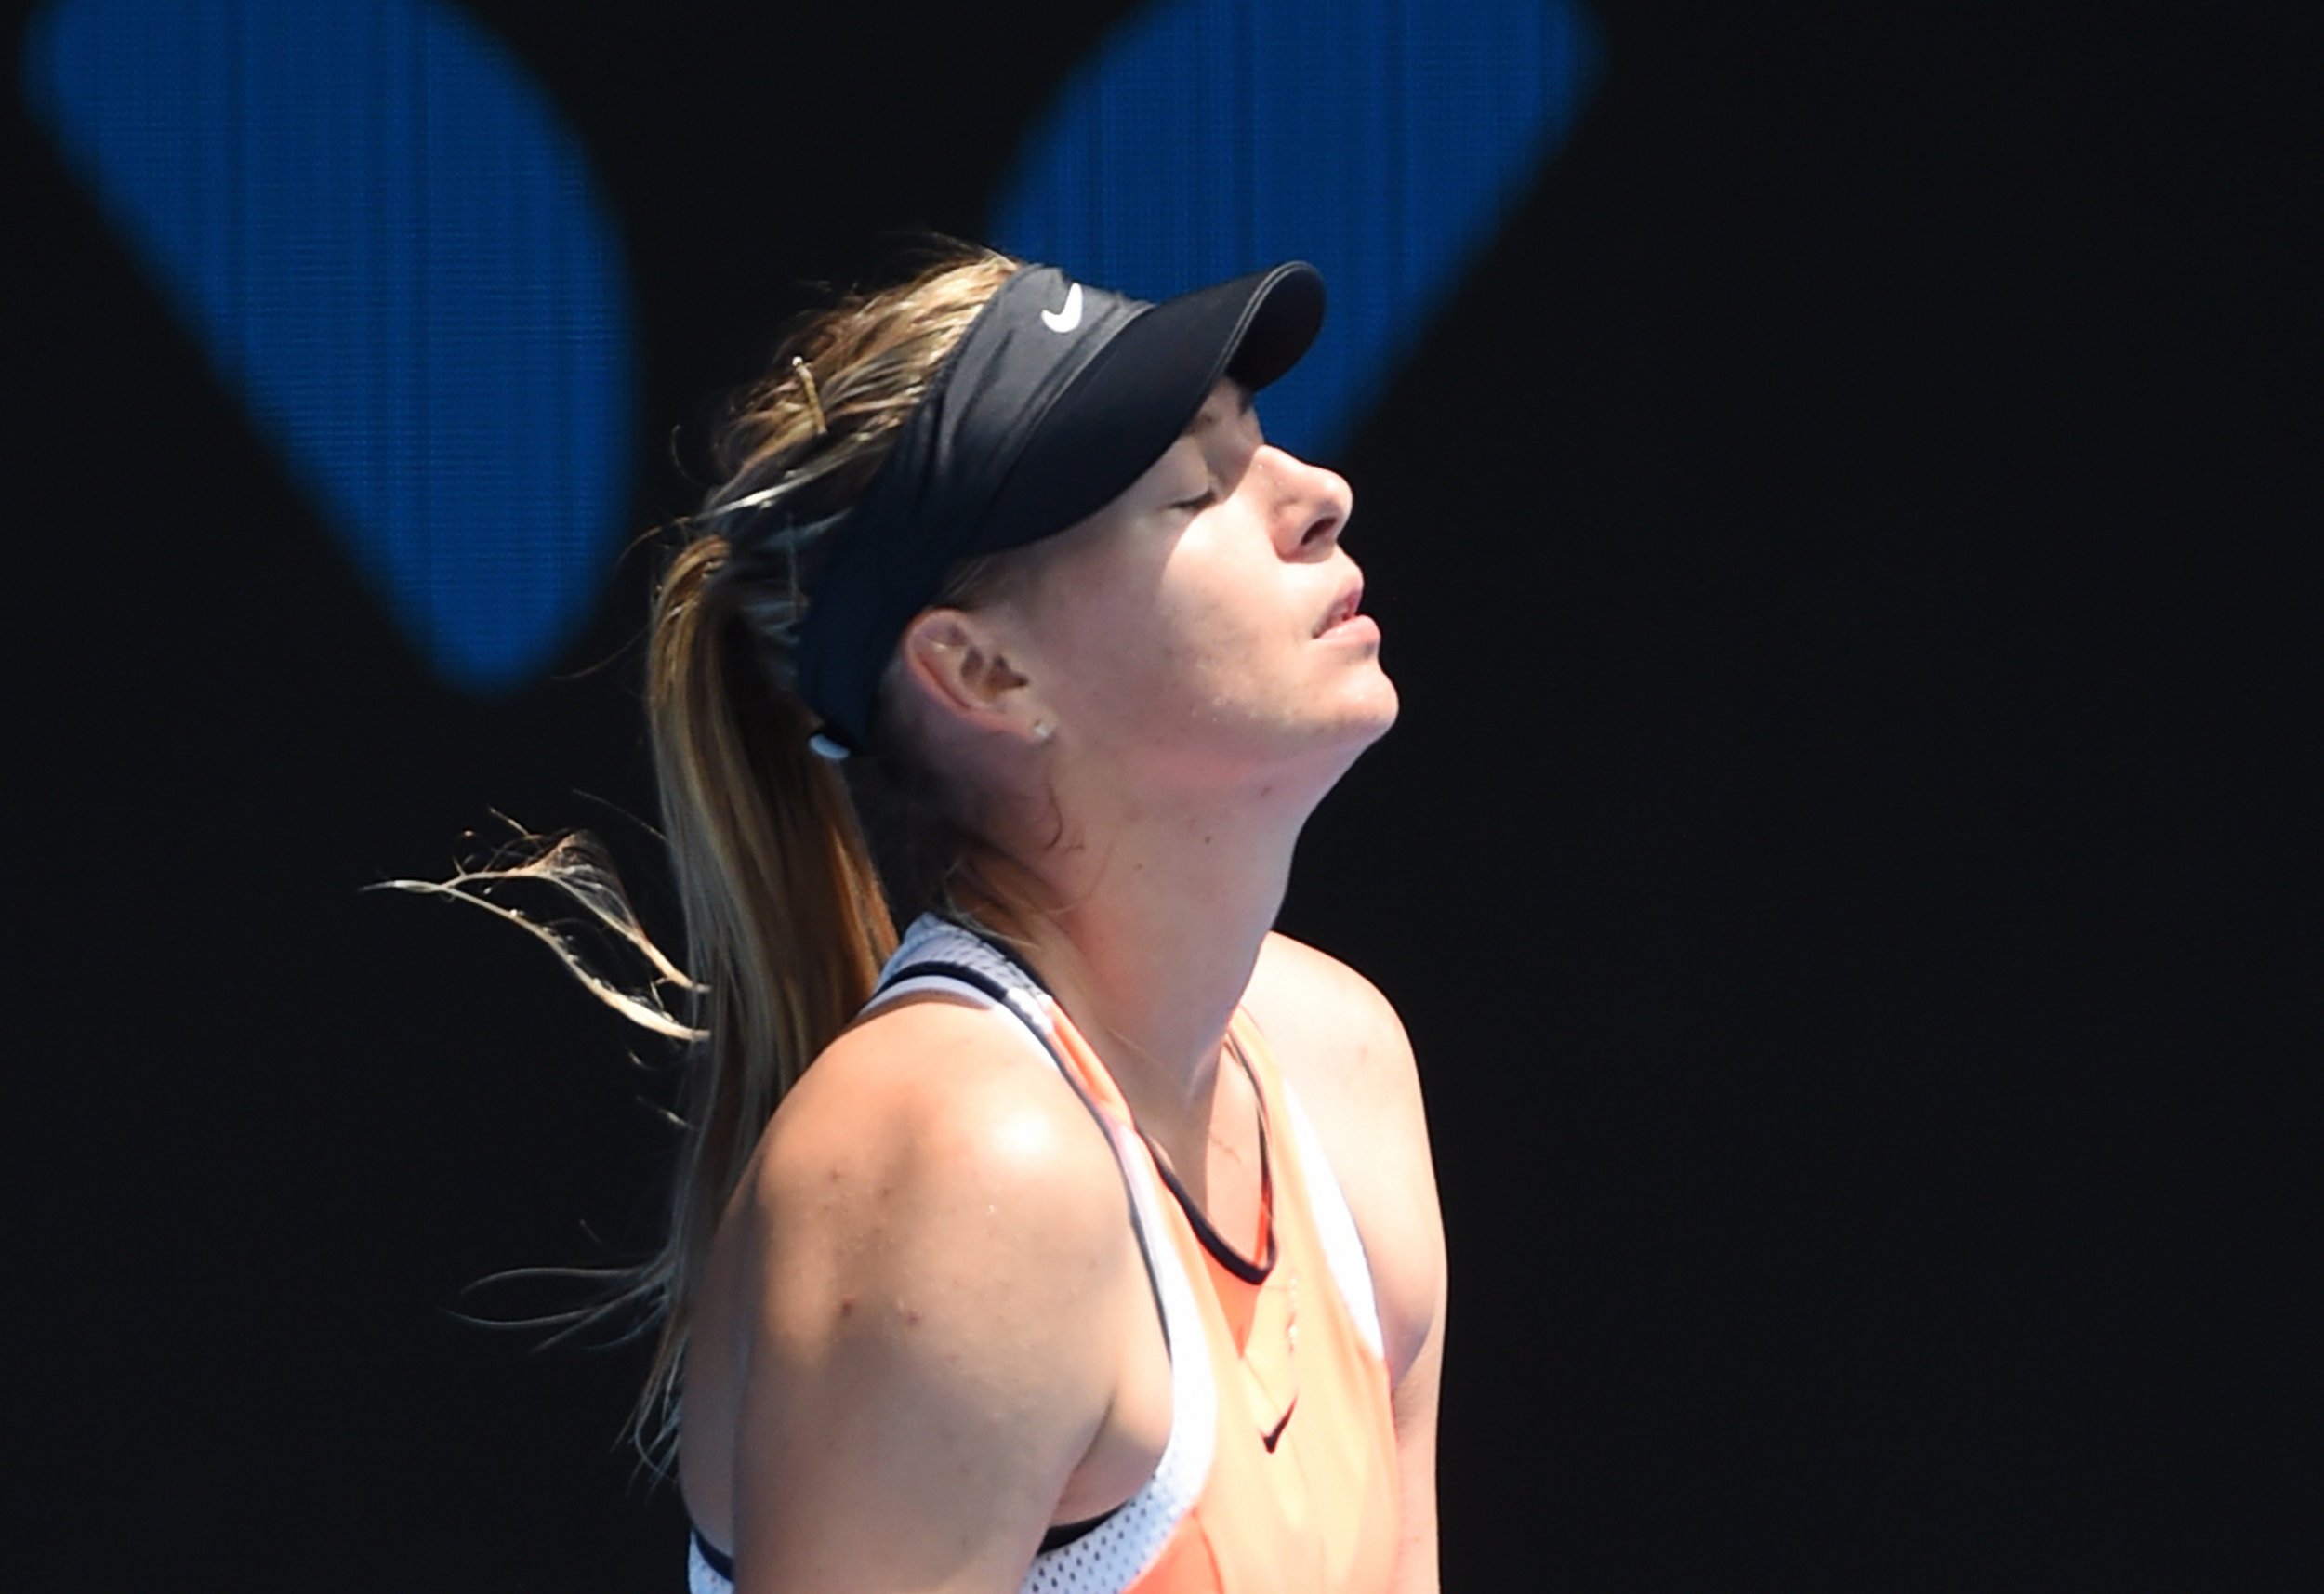 Maria Sharapova has begun a provisional suspension after testing positive for meldonium at the Australian Open.